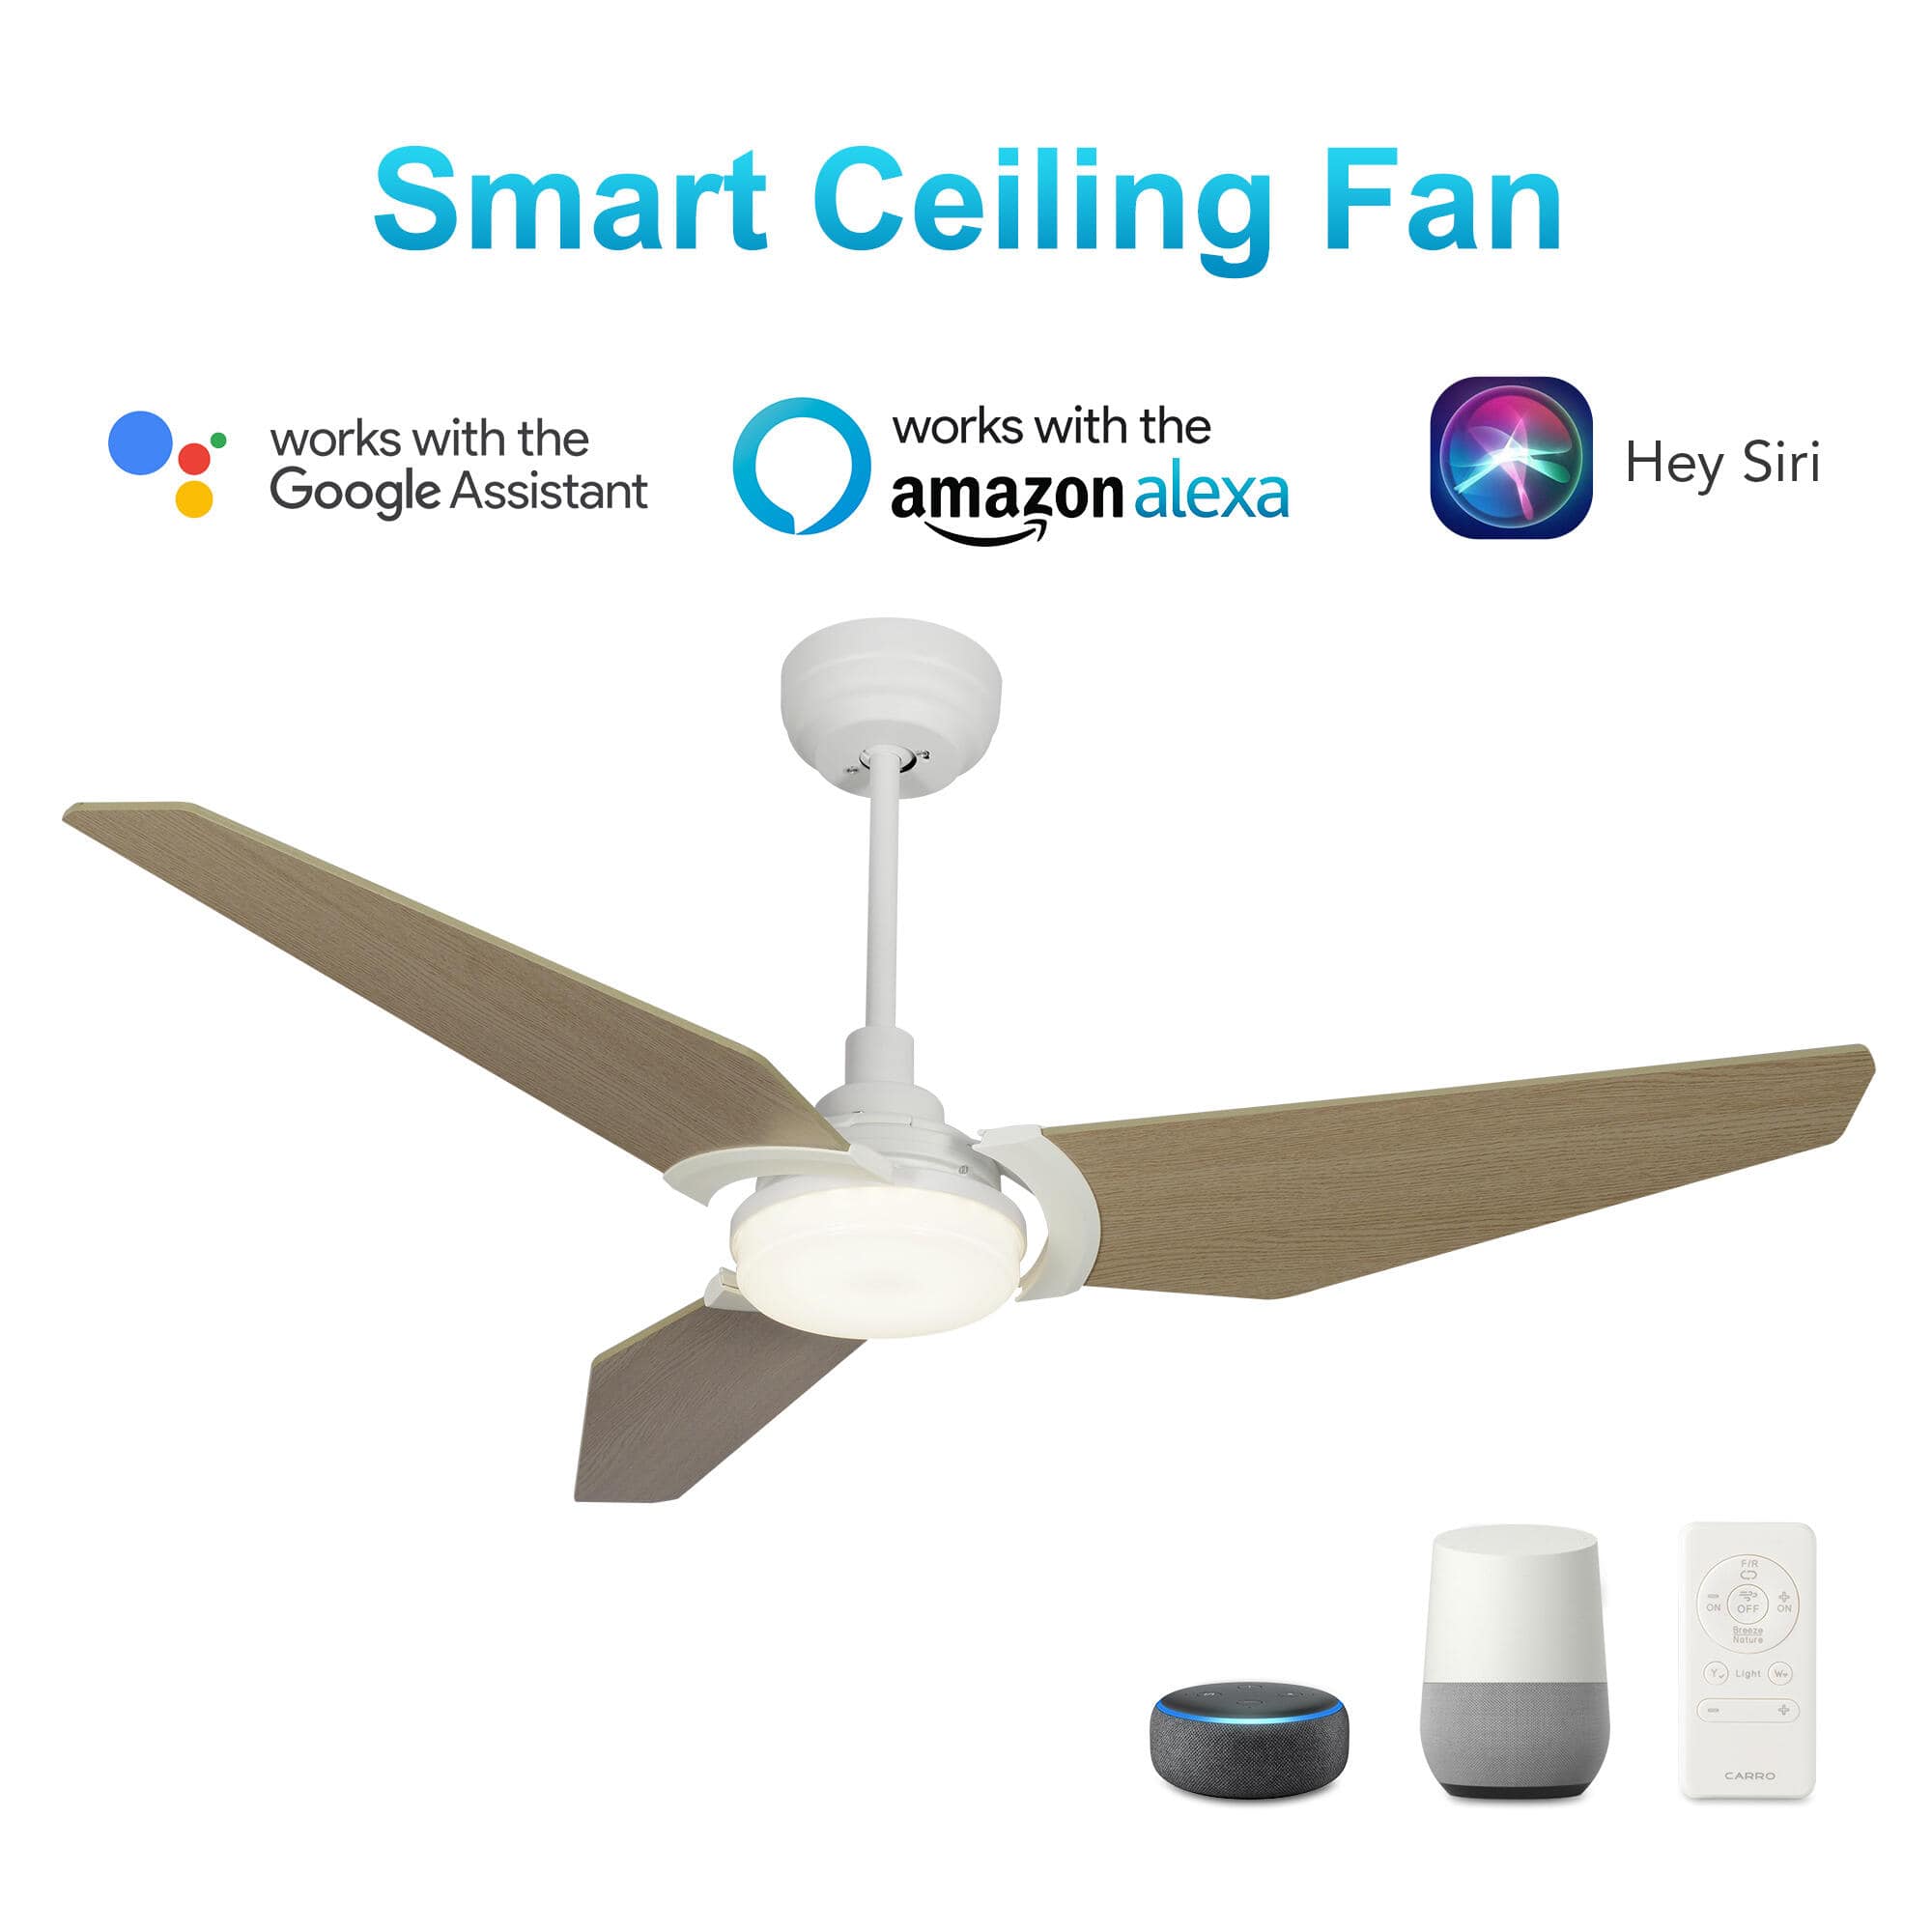 Trailblazer White/Wooden Pattern/Wood 3 Blade Smart Ceiling Fan with Dimmable LED Light Kit Works with Remote Control, Wi-Fi apps and Voice control via Google Assistant/Alexa/Siri